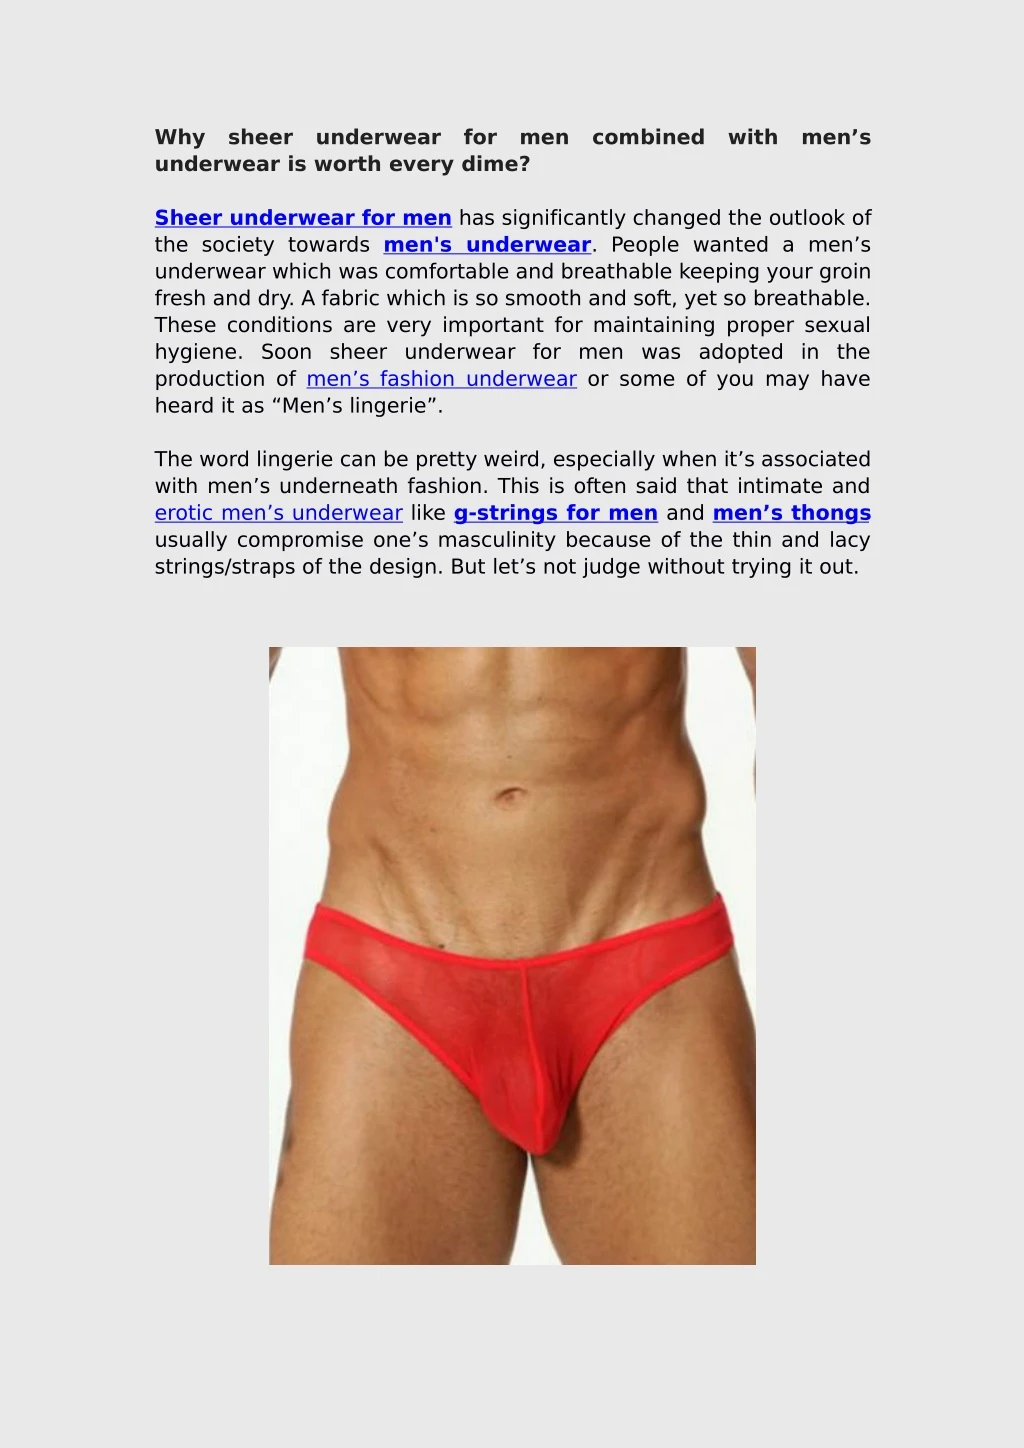 why underwear is worth every dime